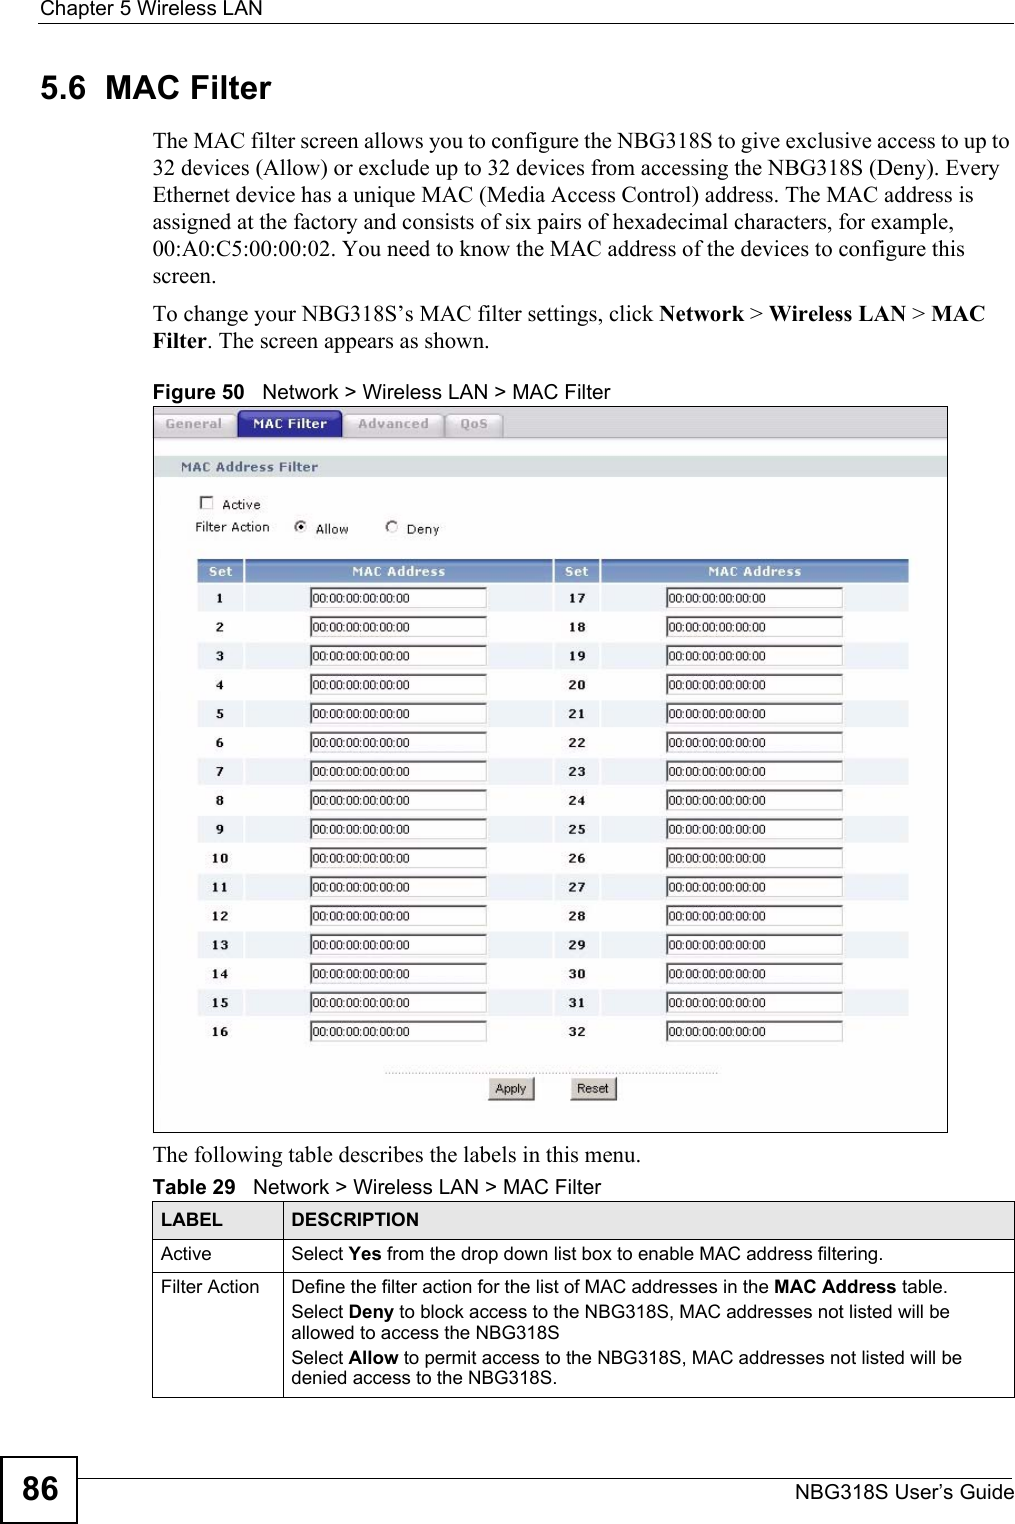 Chapter 5 Wireless LANNBG318S User’s Guide865.6  MAC FilterThe MAC filter screen allows you to configure the NBG318S to give exclusive access to up to 32 devices (Allow) or exclude up to 32 devices from accessing the NBG318S (Deny). Every Ethernet device has a unique MAC (Media Access Control) address. The MAC address is assigned at the factory and consists of six pairs of hexadecimal characters, for example, 00:A0:C5:00:00:02. You need to know the MAC address of the devices to configure this screen.To change your NBG318S’s MAC filter settings, click Network &gt; Wireless LAN &gt; MAC Filter. The screen appears as shown.Figure 50   Network &gt; Wireless LAN &gt; MAC FilterThe following table describes the labels in this menu.Table 29   Network &gt; Wireless LAN &gt; MAC FilterLABEL DESCRIPTIONActive Select Yes from the drop down list box to enable MAC address filtering.Filter Action  Define the filter action for the list of MAC addresses in the MAC Address table. Select Deny to block access to the NBG318S, MAC addresses not listed will be allowed to access the NBG318S Select Allow to permit access to the NBG318S, MAC addresses not listed will be denied access to the NBG318S. 